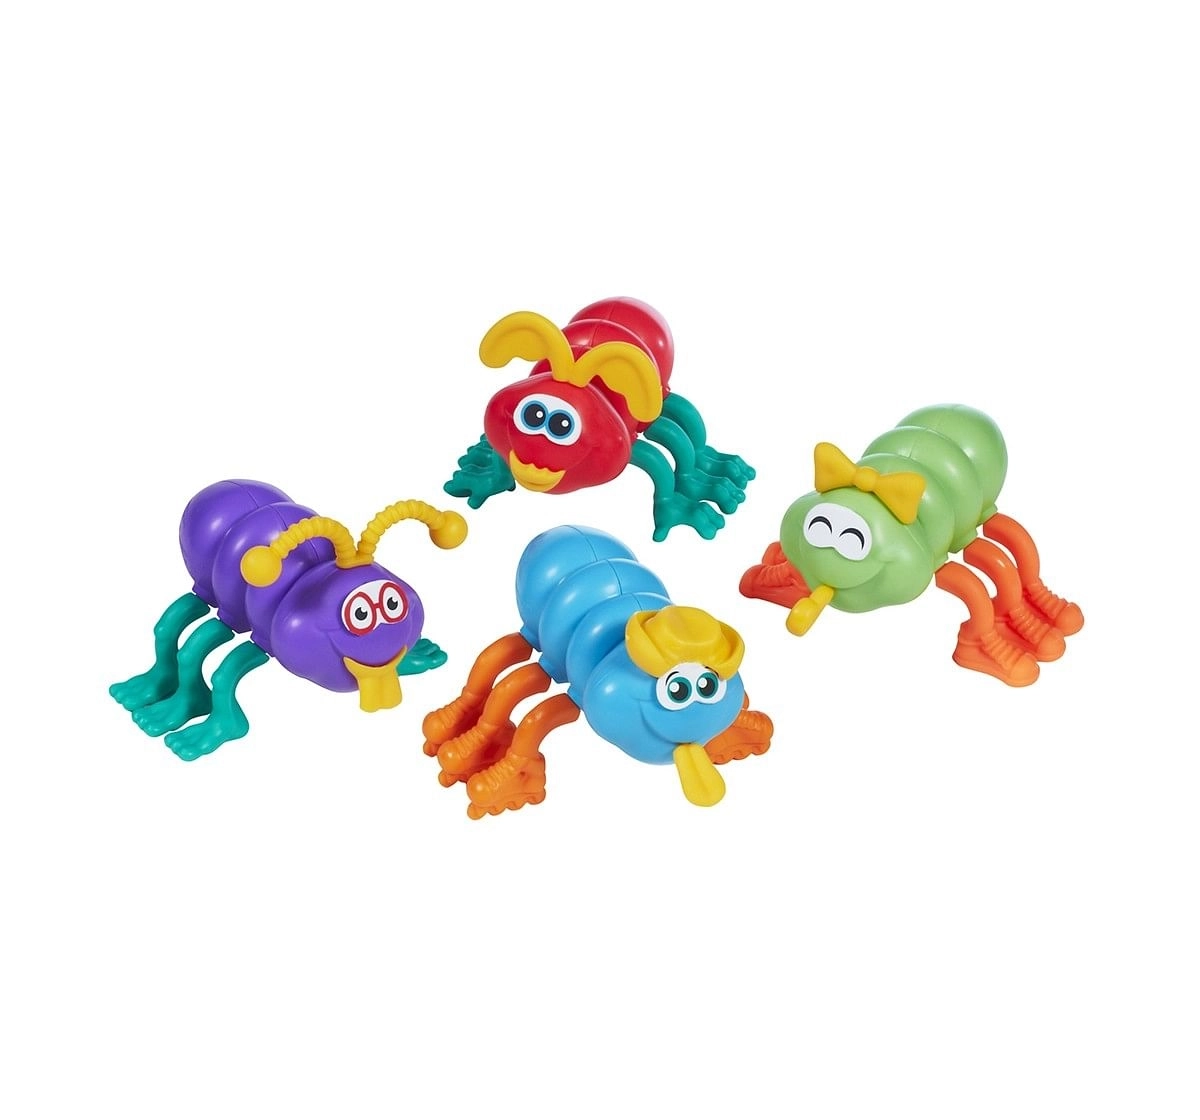 Hasbro Cootie Game for Kids age 3Y+ 